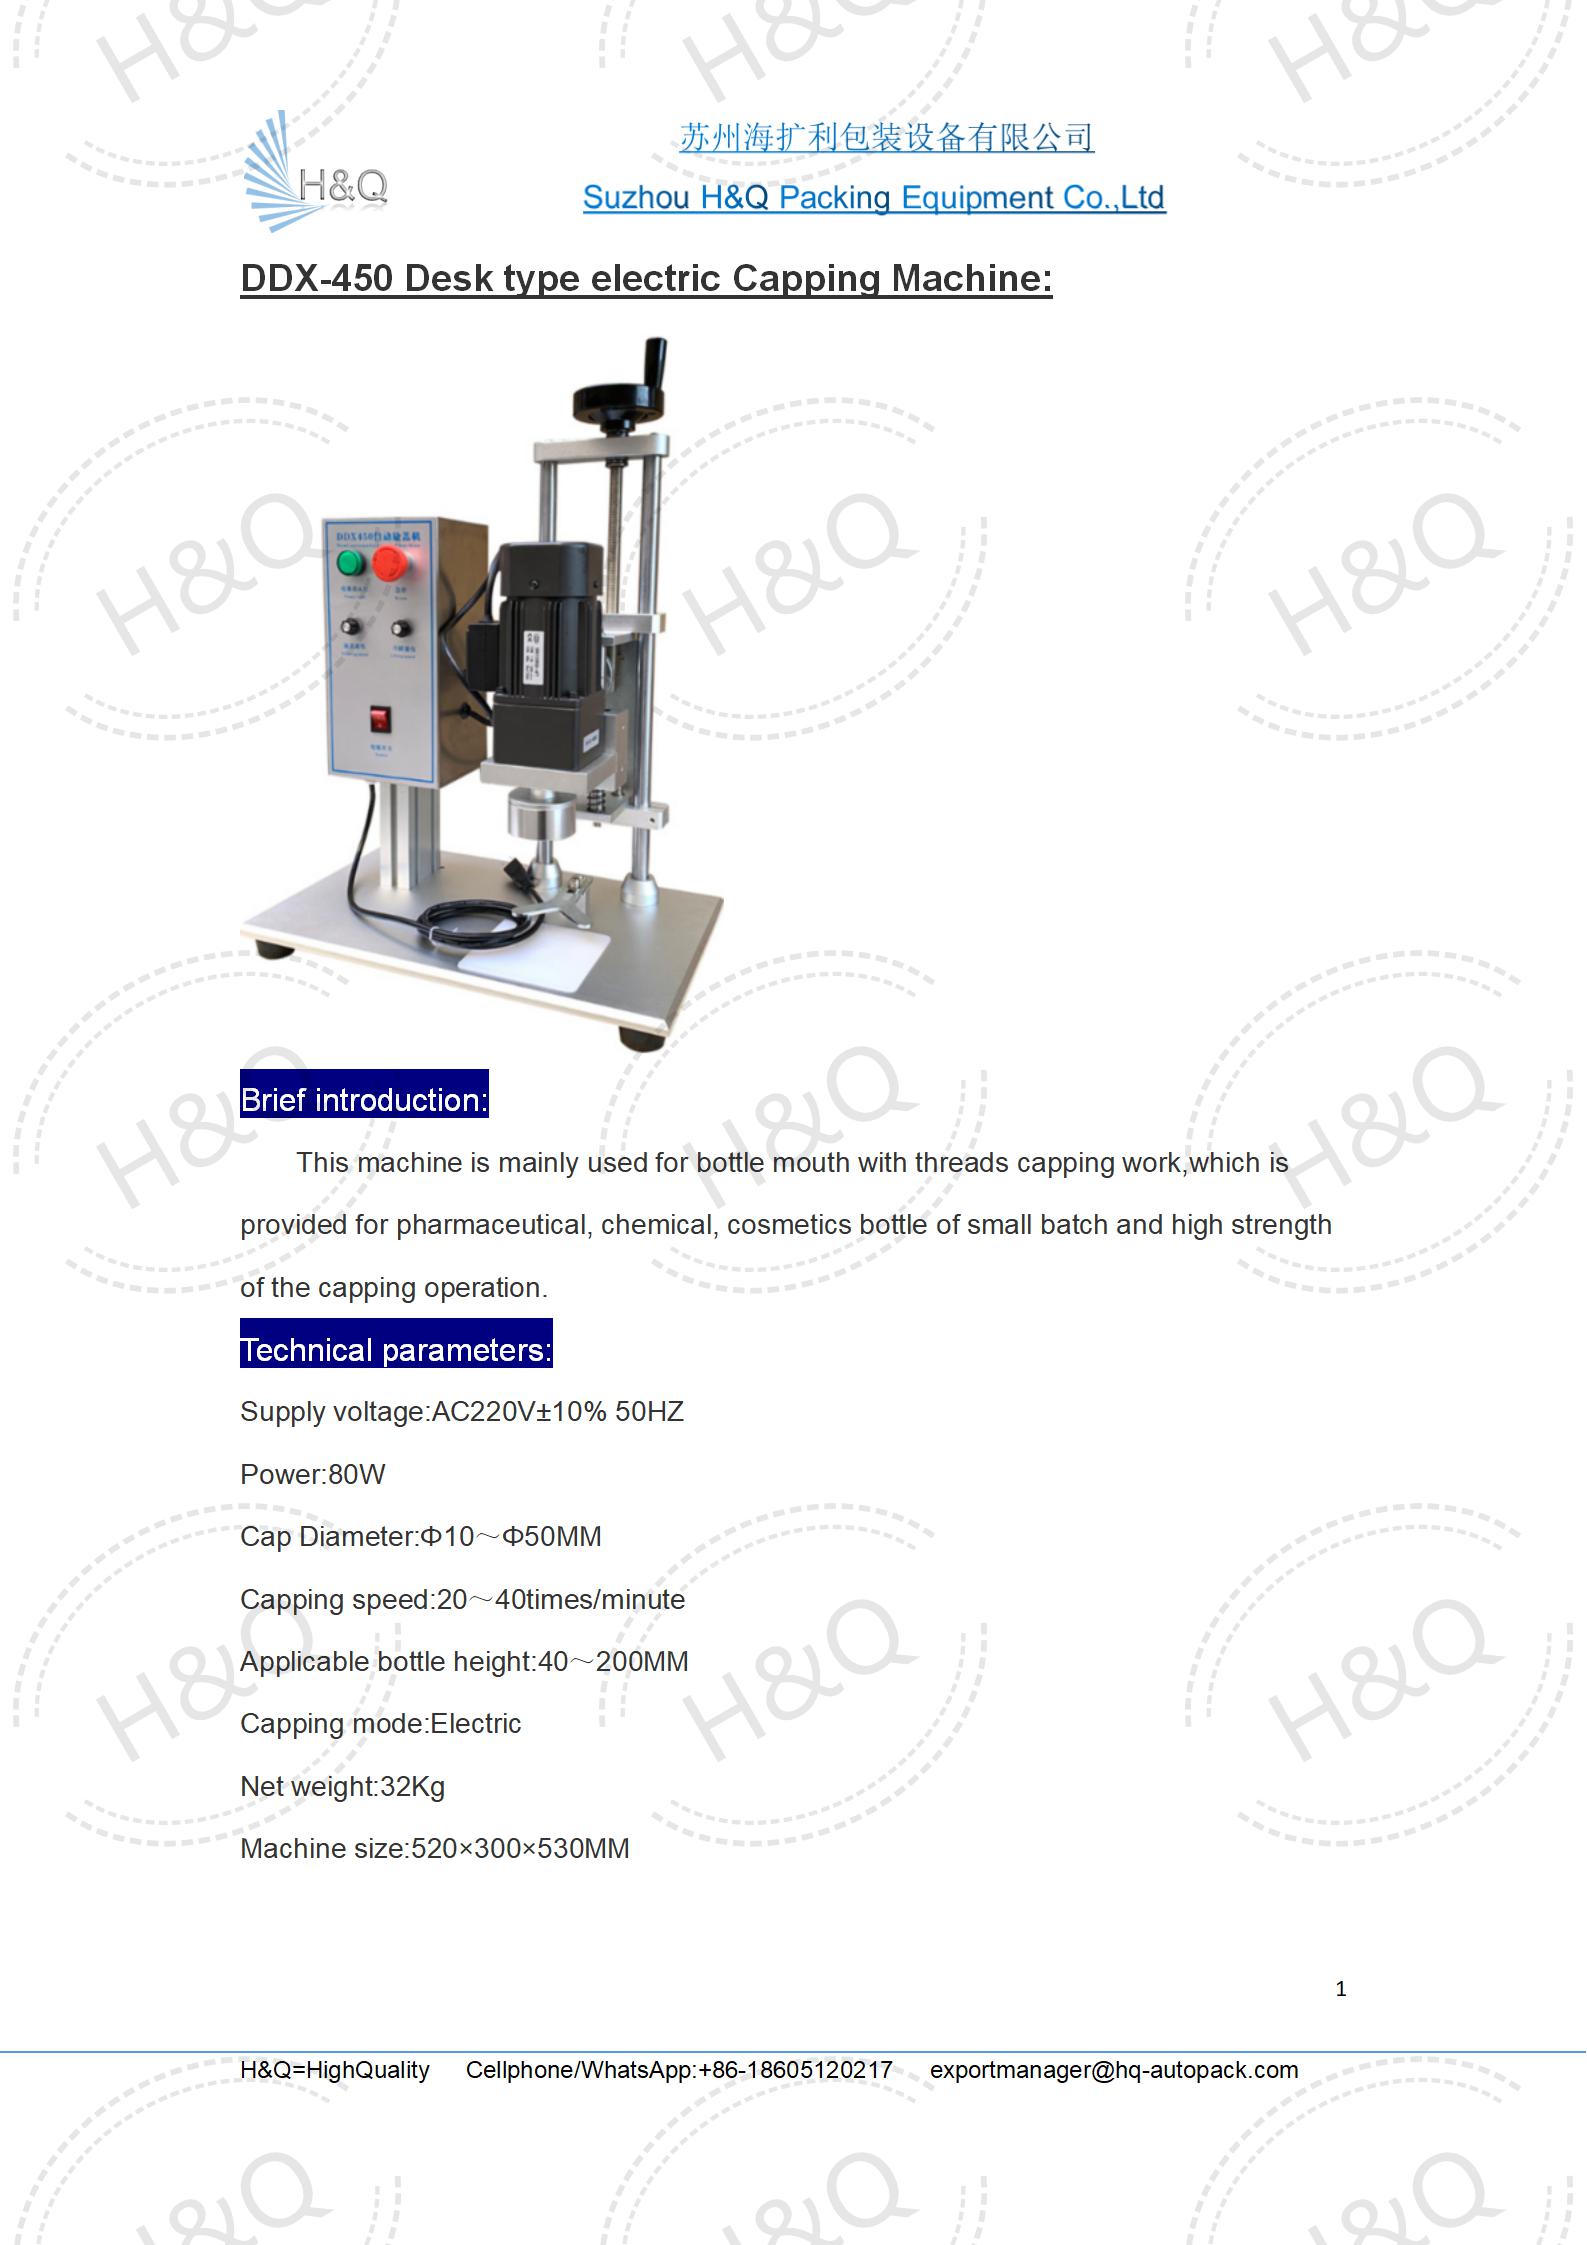 DDX-450 Desk type electric Capping Machine_01.jpg